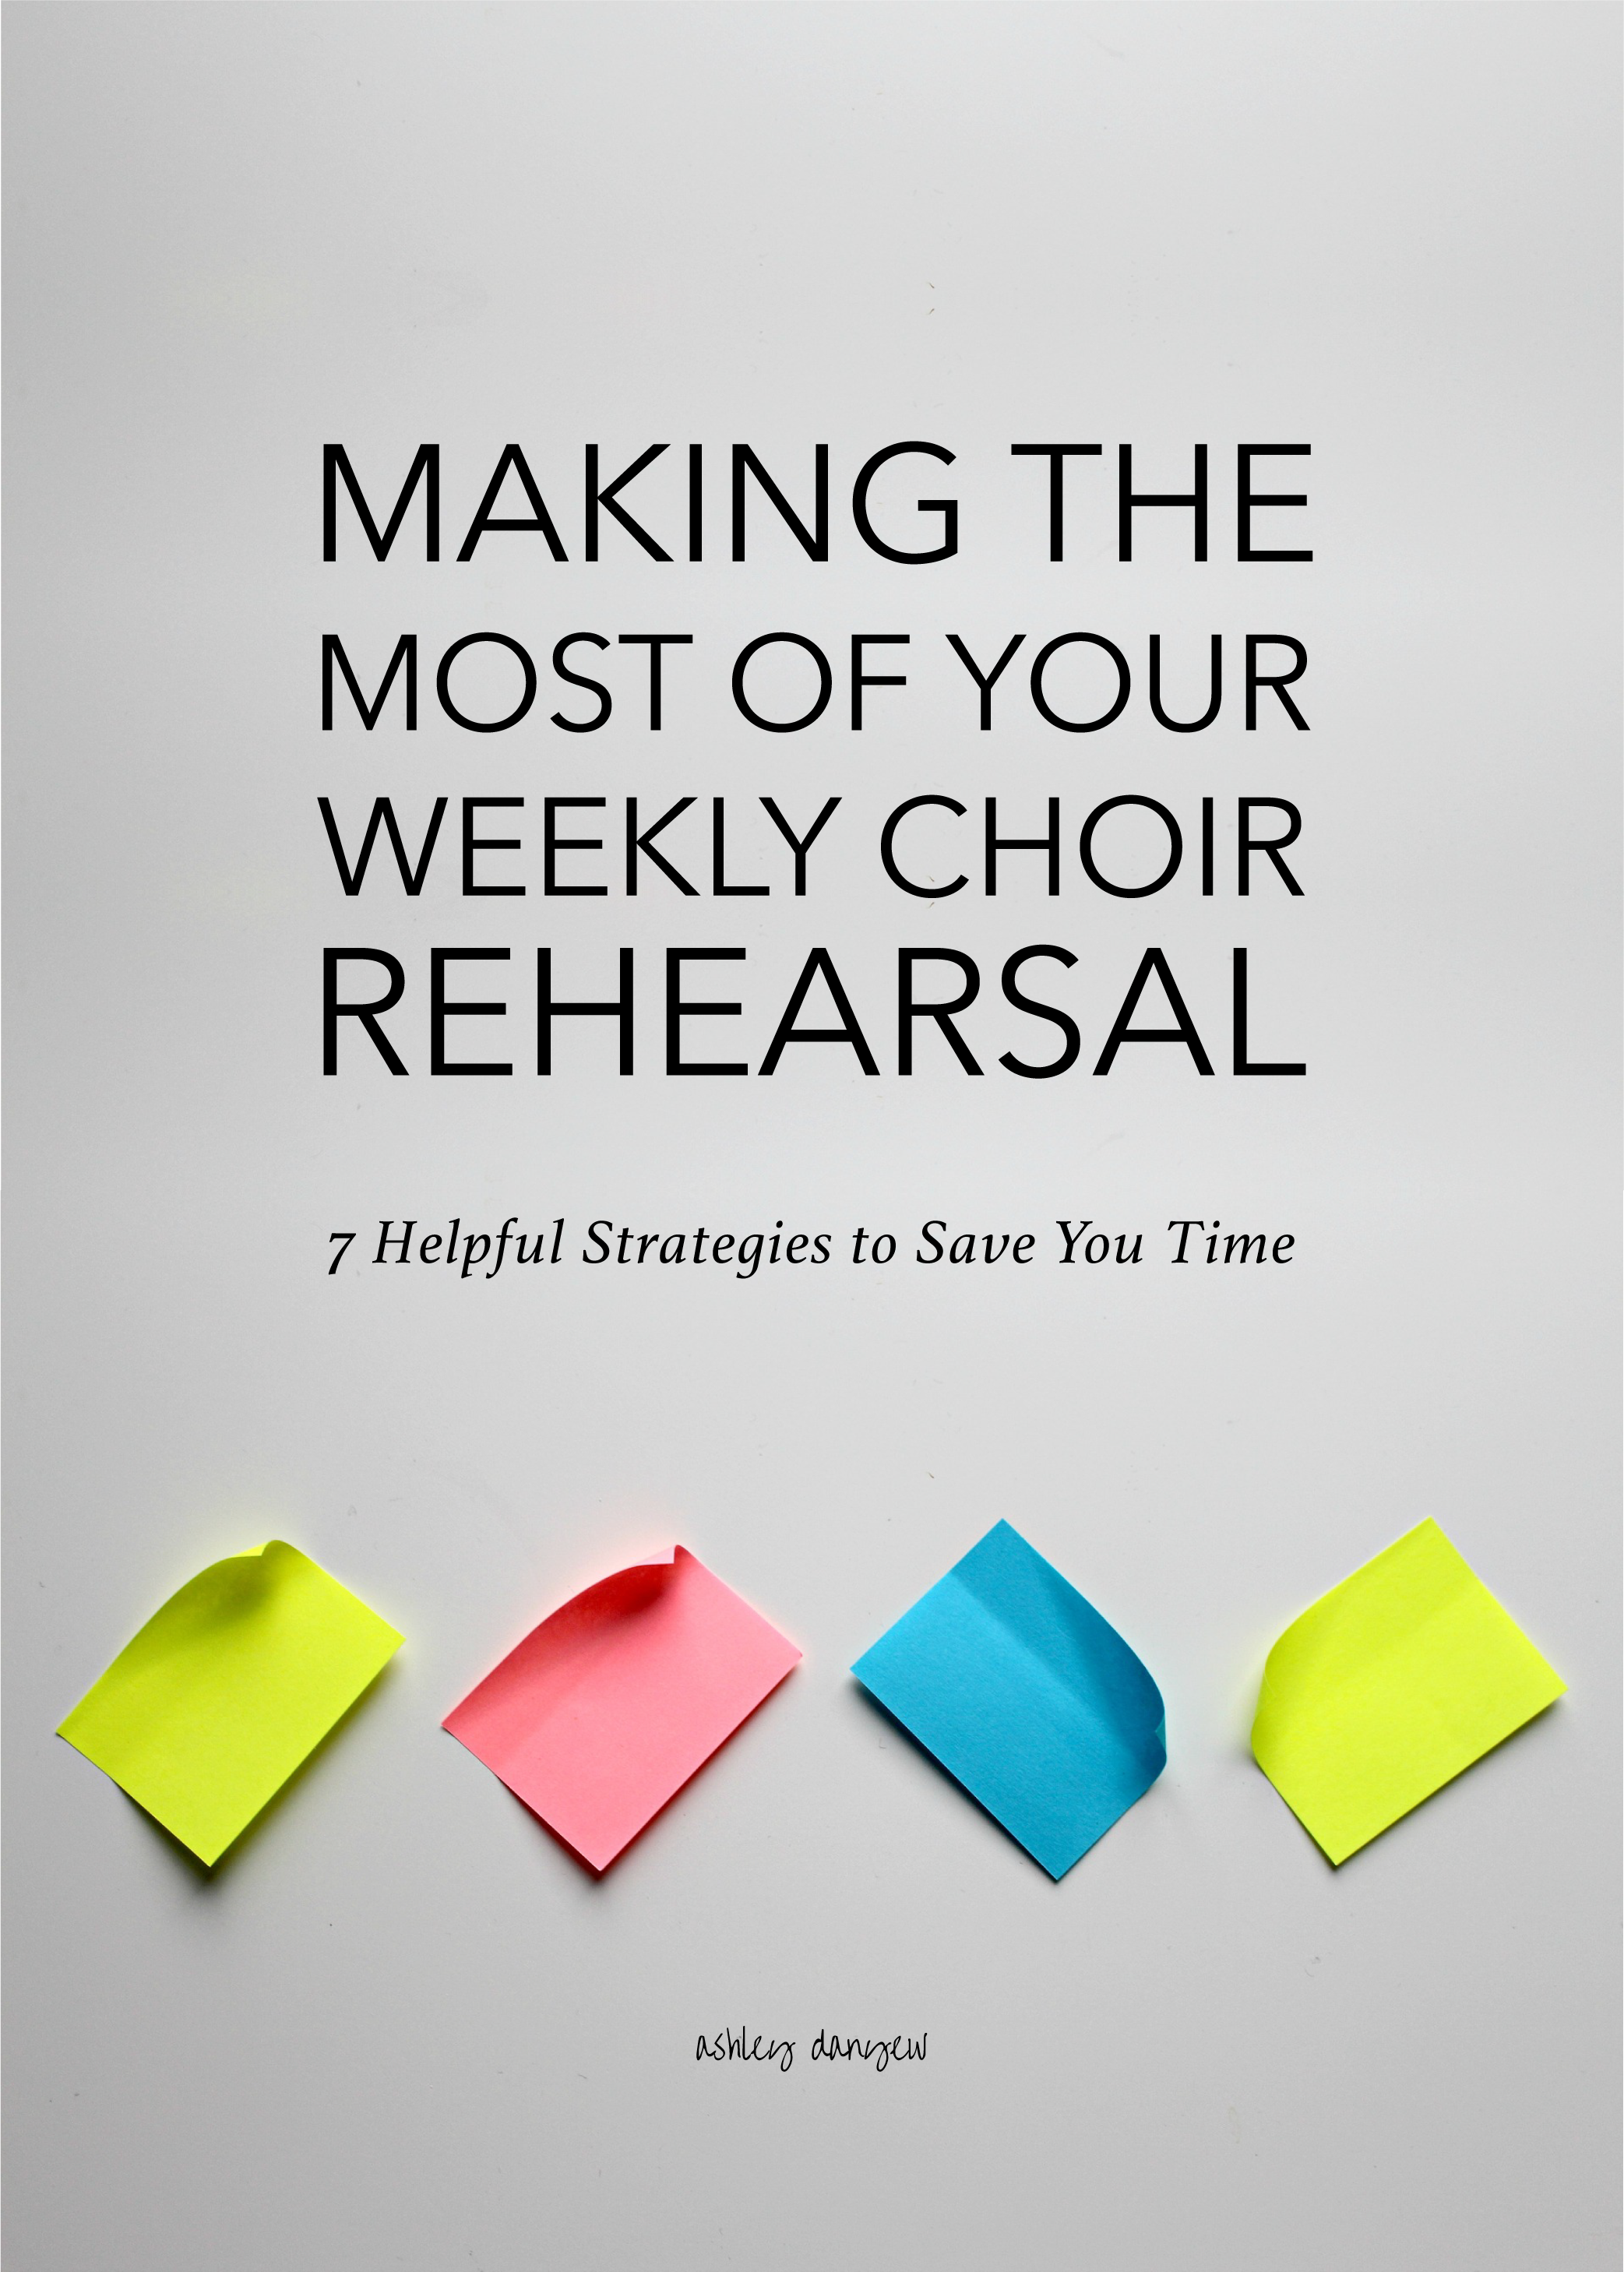 Making the Most of Your Weekly Choir Rehearsal